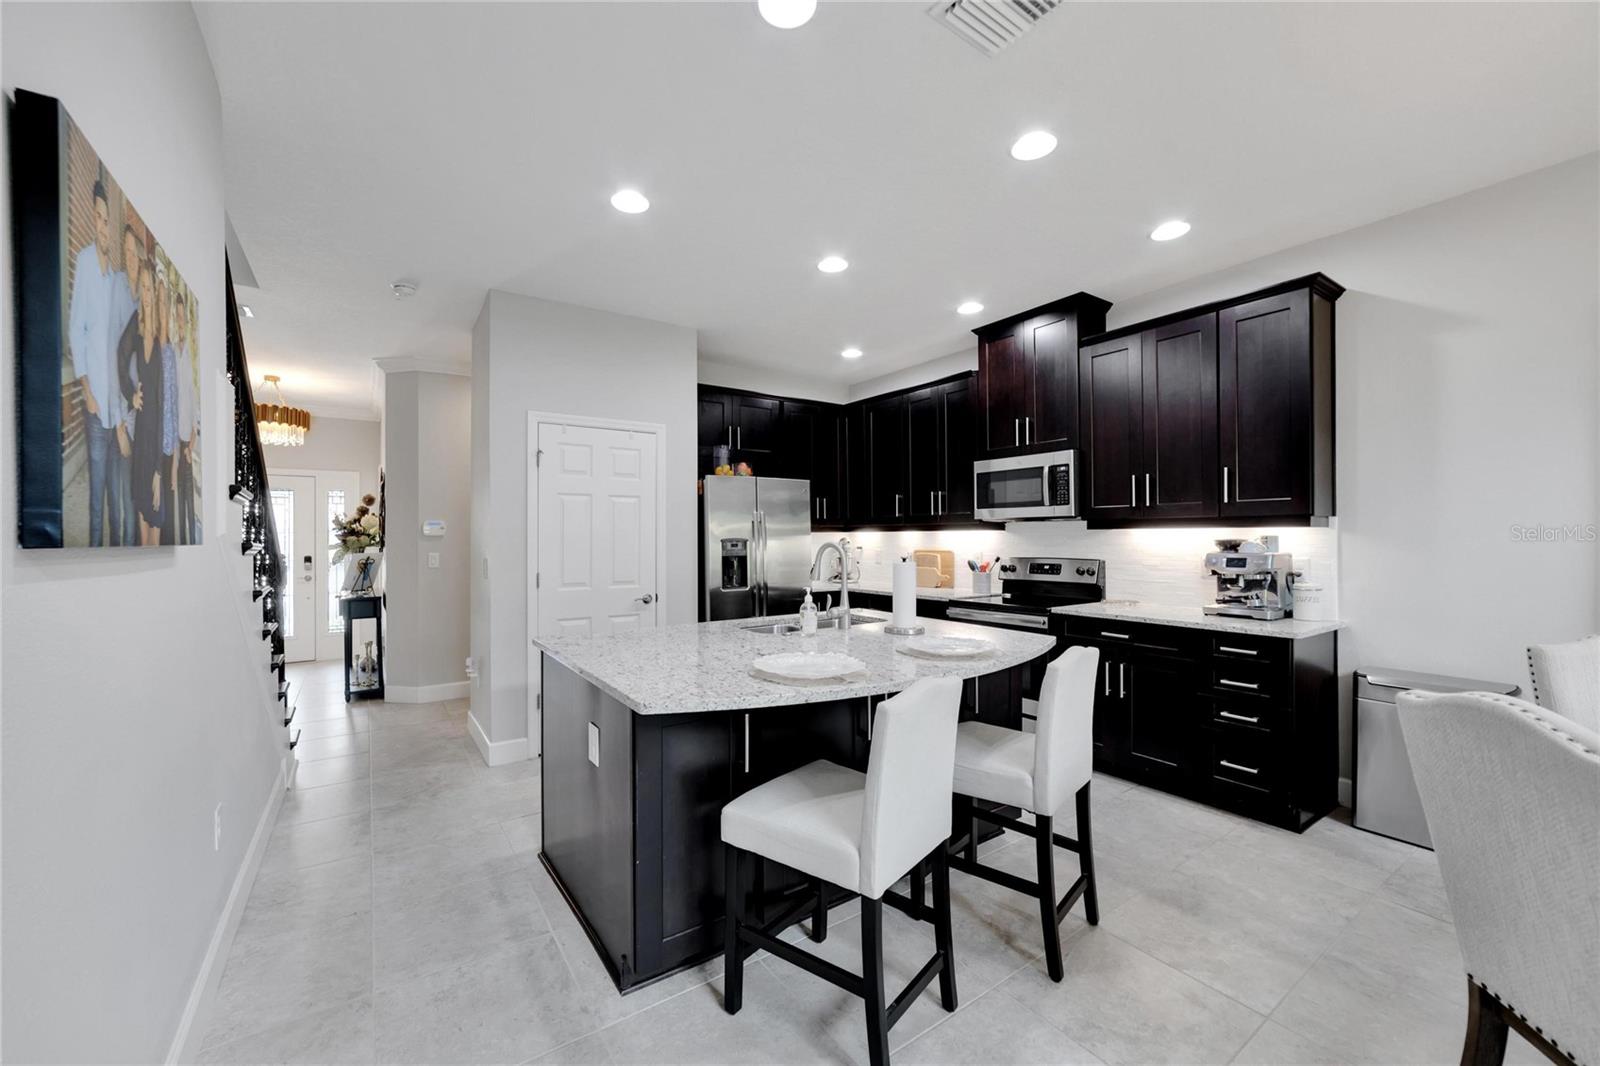 Eat-in kitchen at 12306 Terracina Chase Ct, Tampa, FL 33625